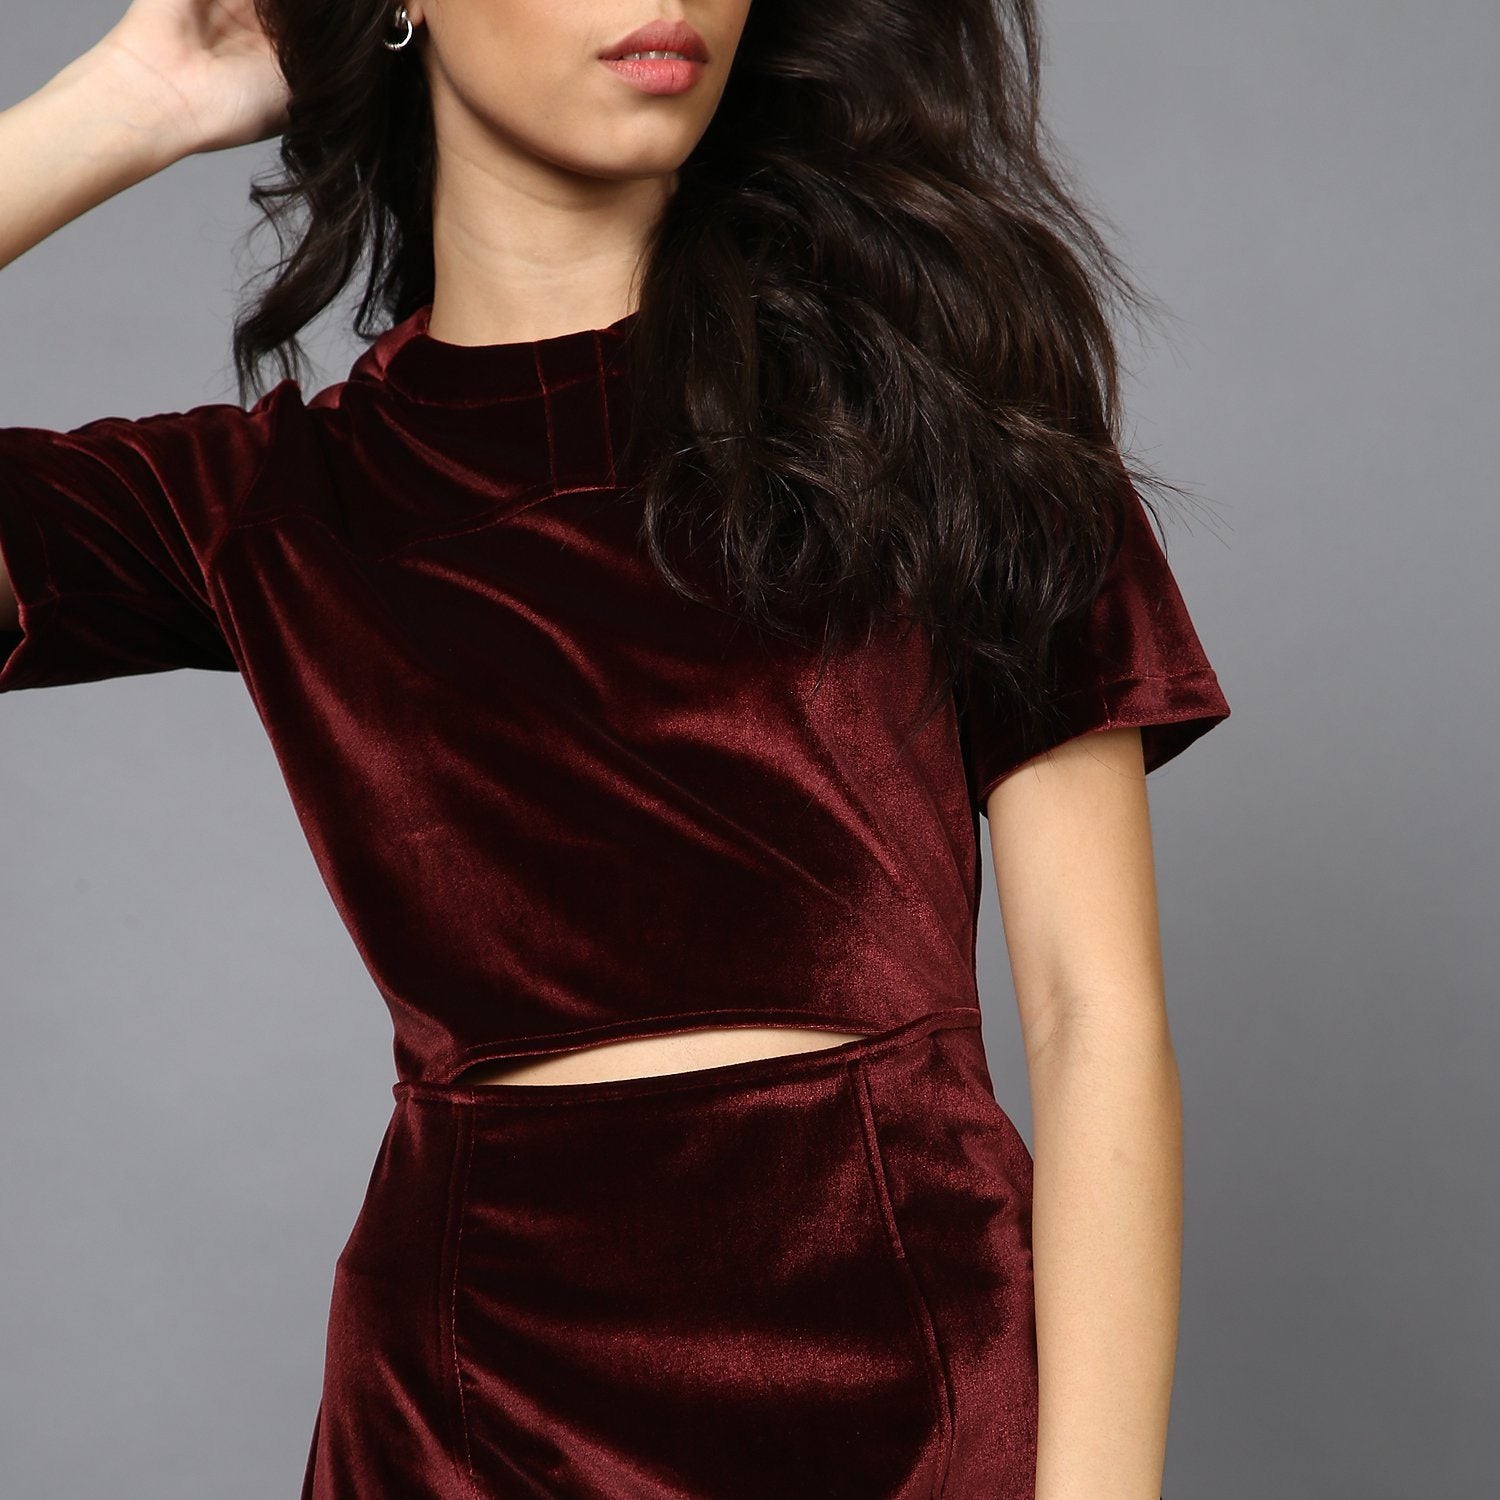 Maroon Velvet Dress with Mid-riff cut out & Stitch Detail